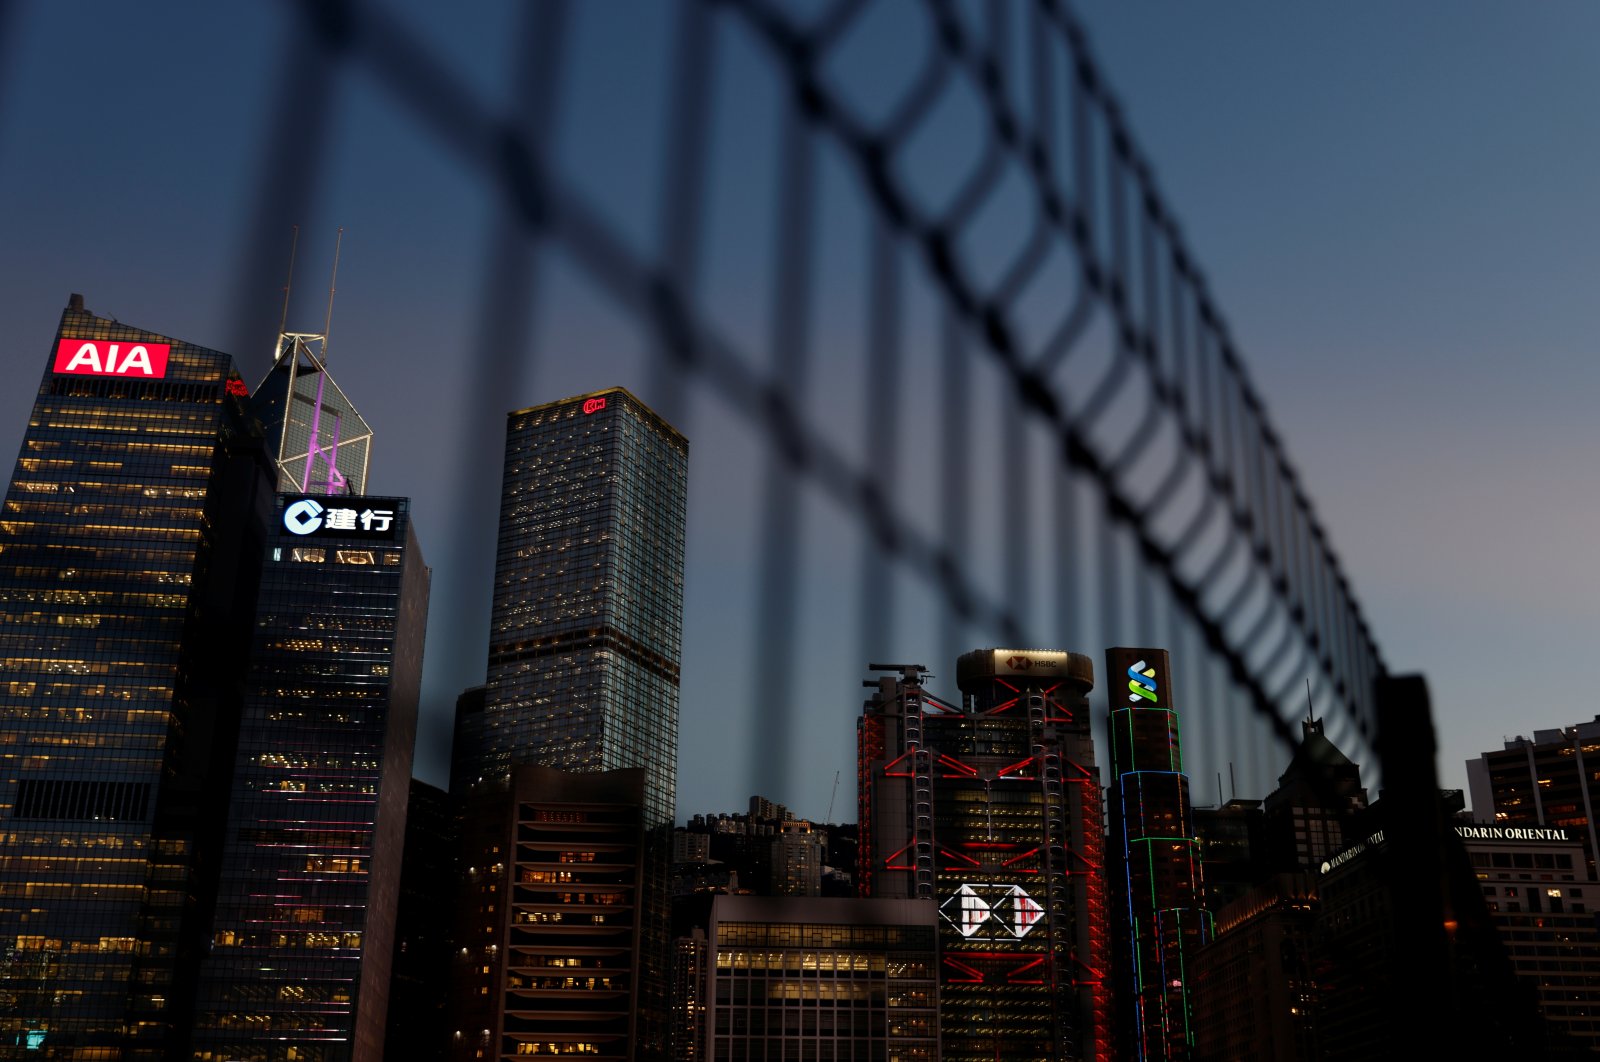 Skyscrapers at the central business district, including AIA Central, China Construction Bank (CCB) Tower, Bank of China Tower, Cheung Kong Centre, HSBC and Standard Chartered Bank headquarters, are seen through a fence during sunset in Hong Kong, Aug. 17, 2021. (Reuters Photo)